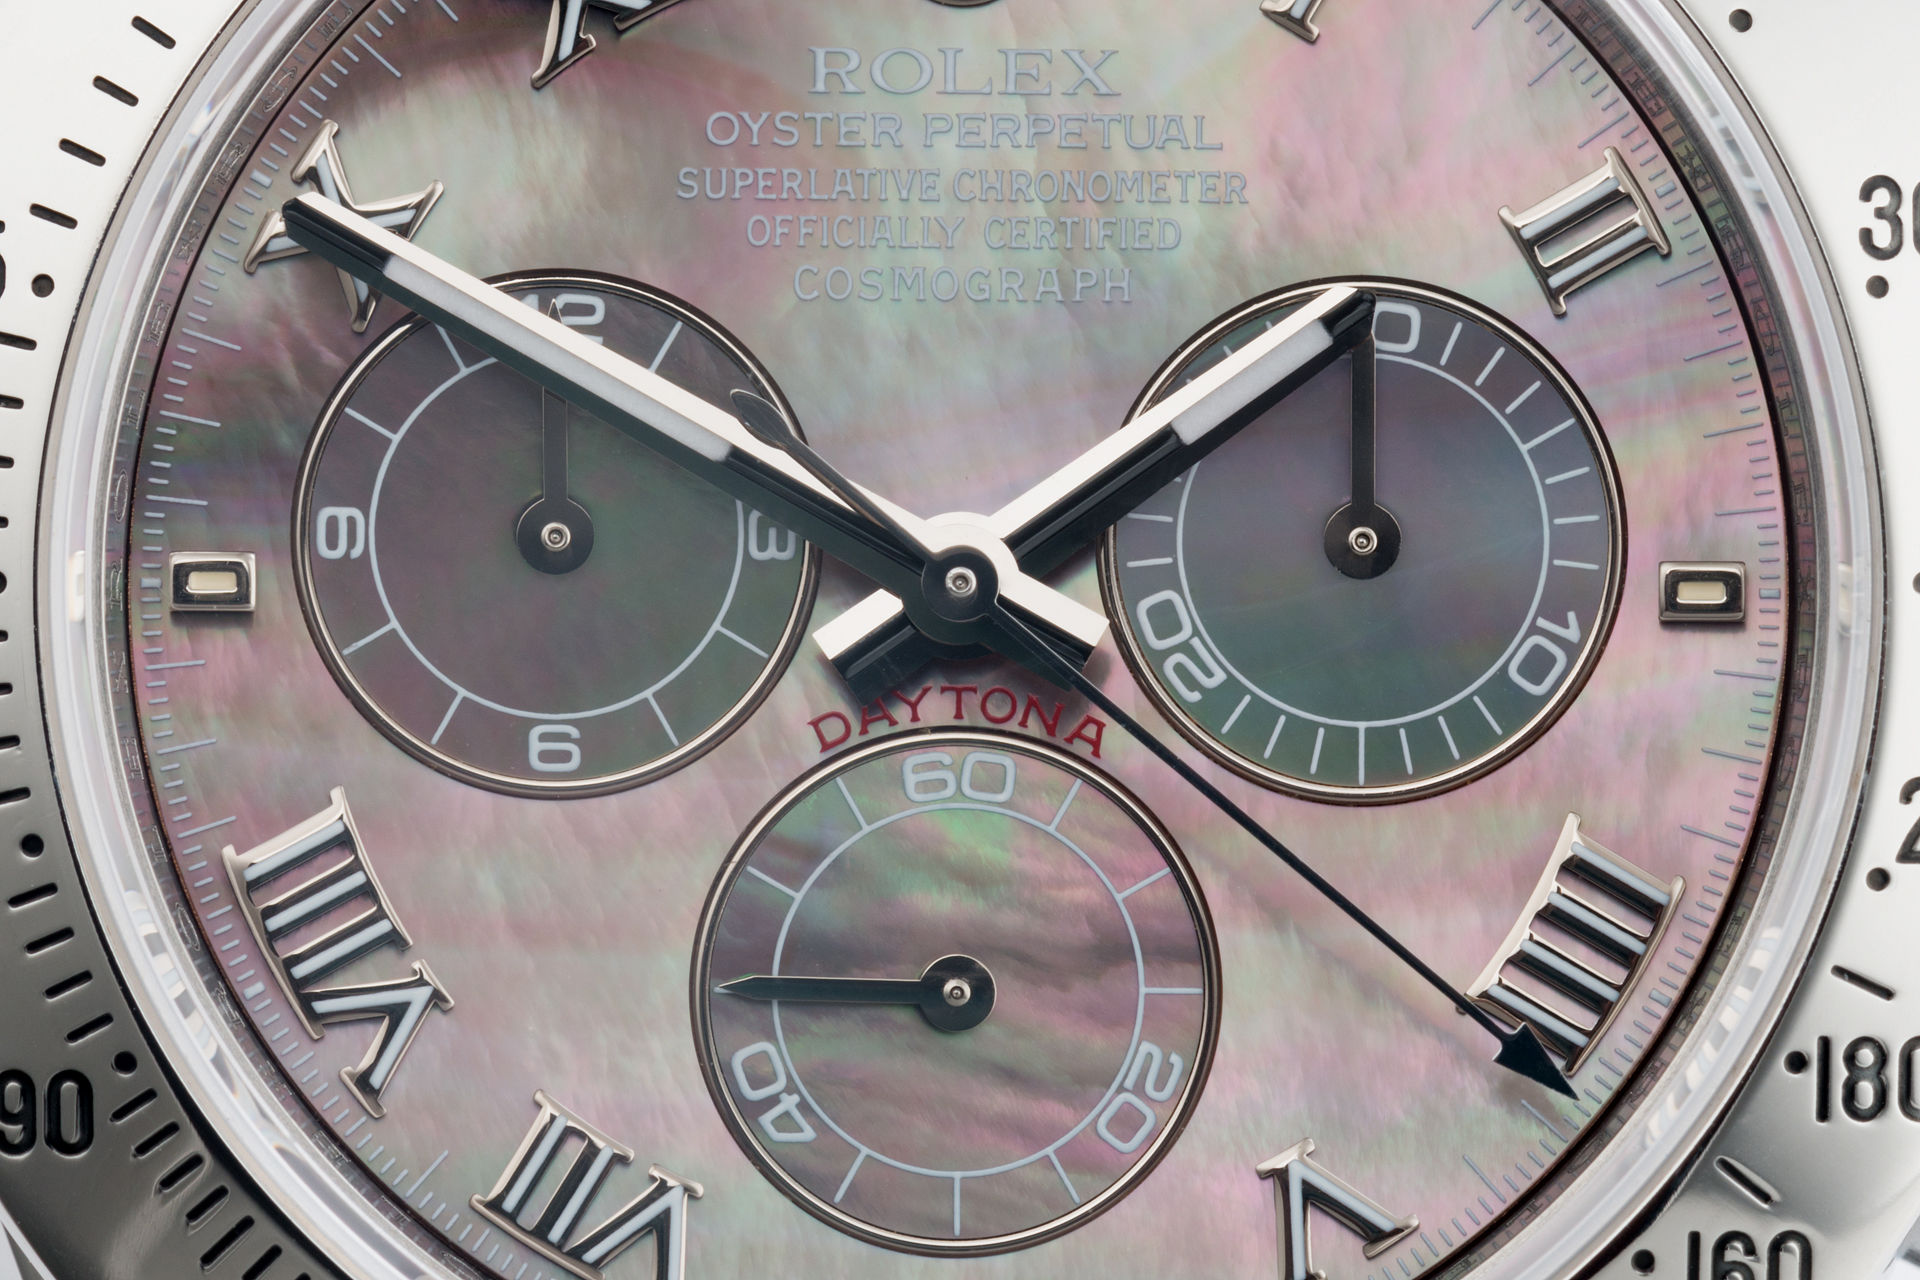 ref 116520 | Special Order Mother of Pearl Dial | Rolex Cosmograph Daytona